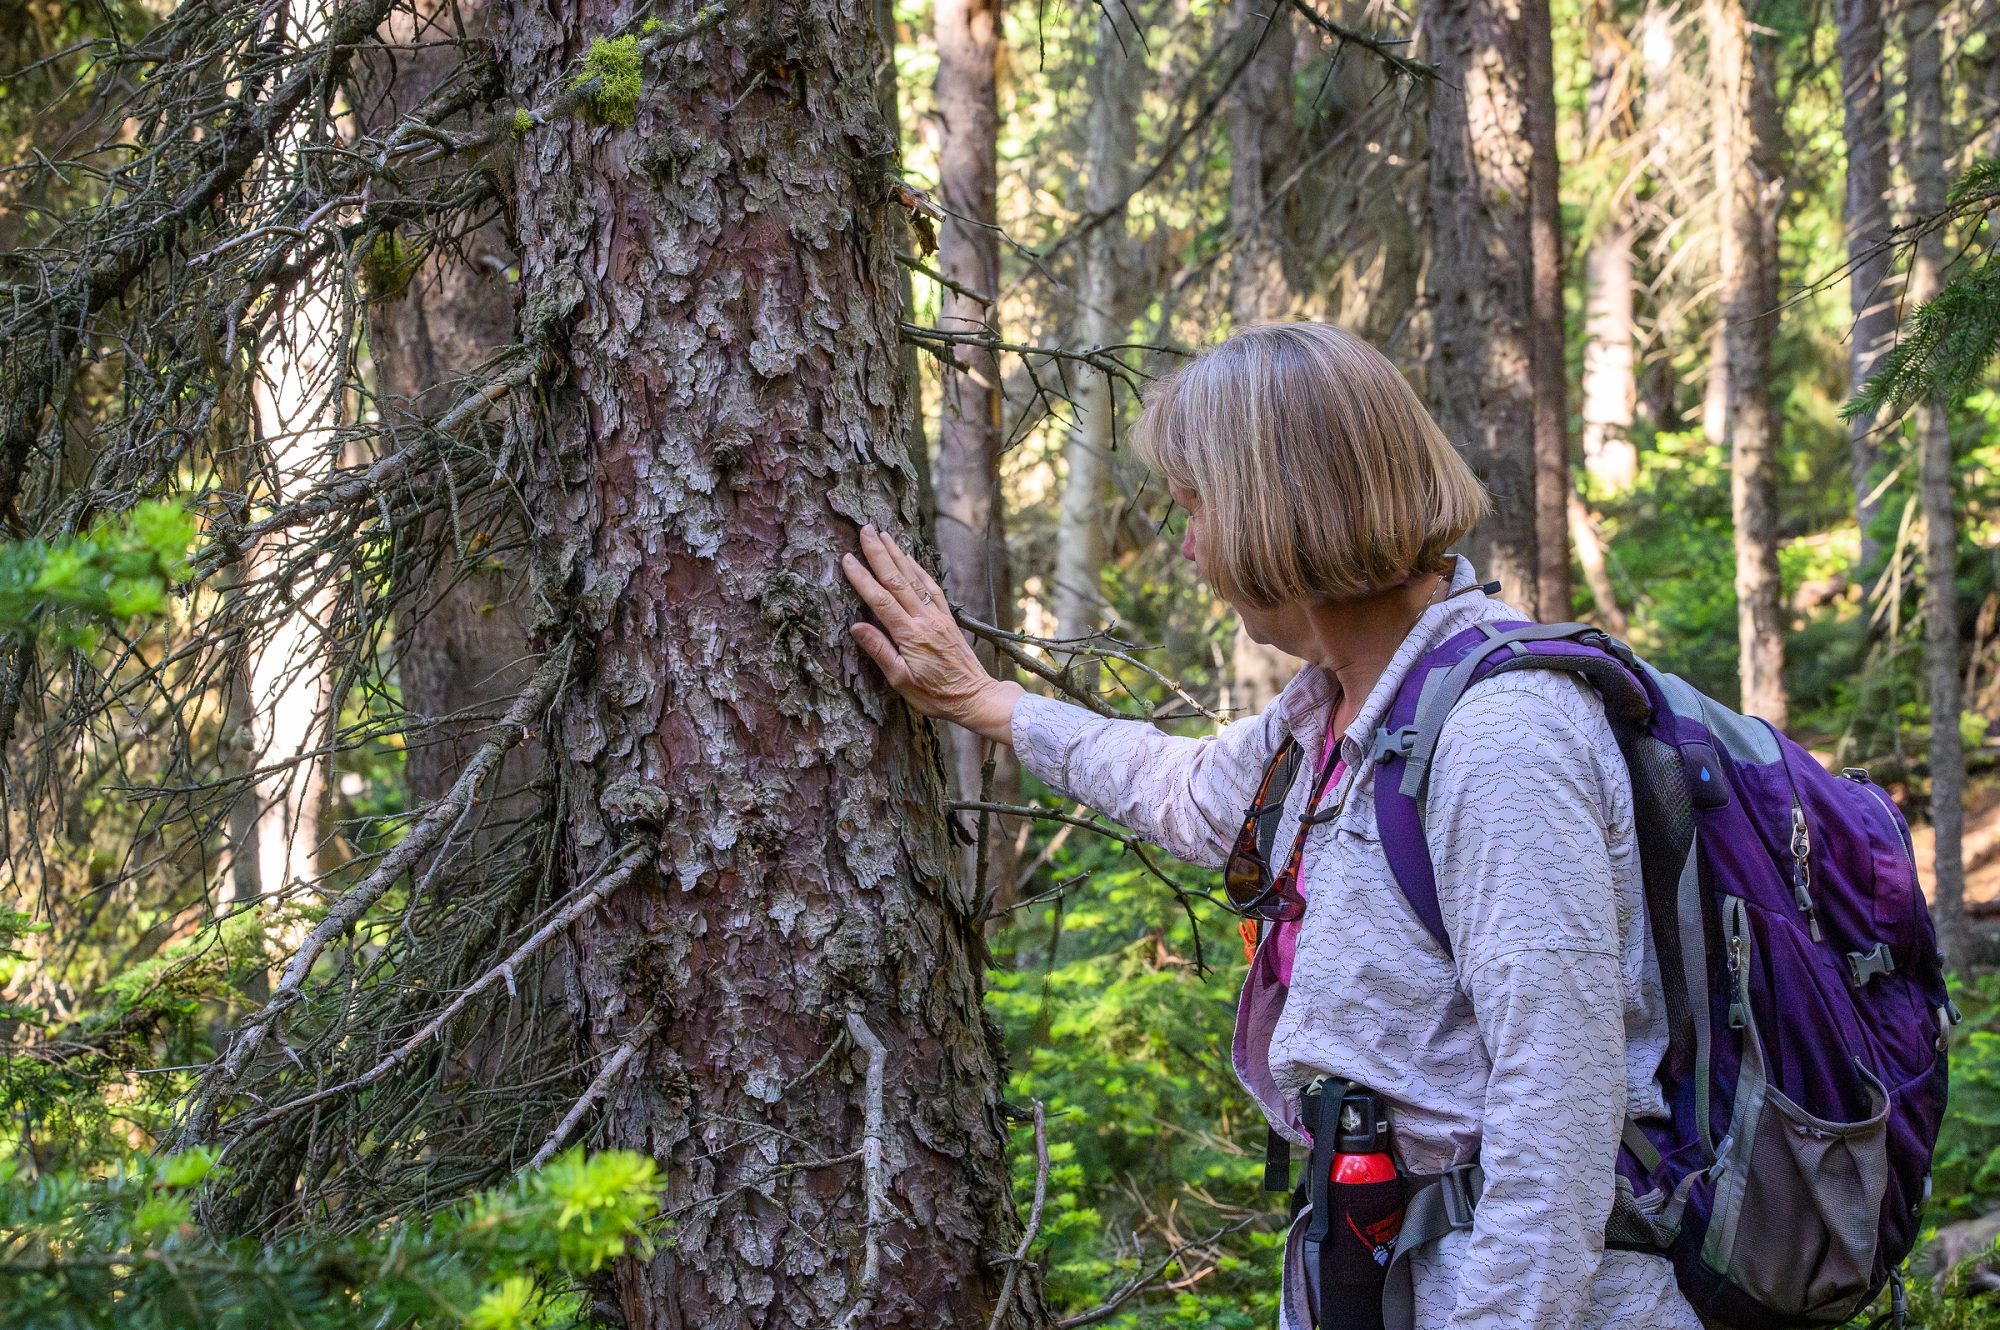 A woman wearing a purple backpack holds her hand softly against the bark of a tree in an old growth forest.